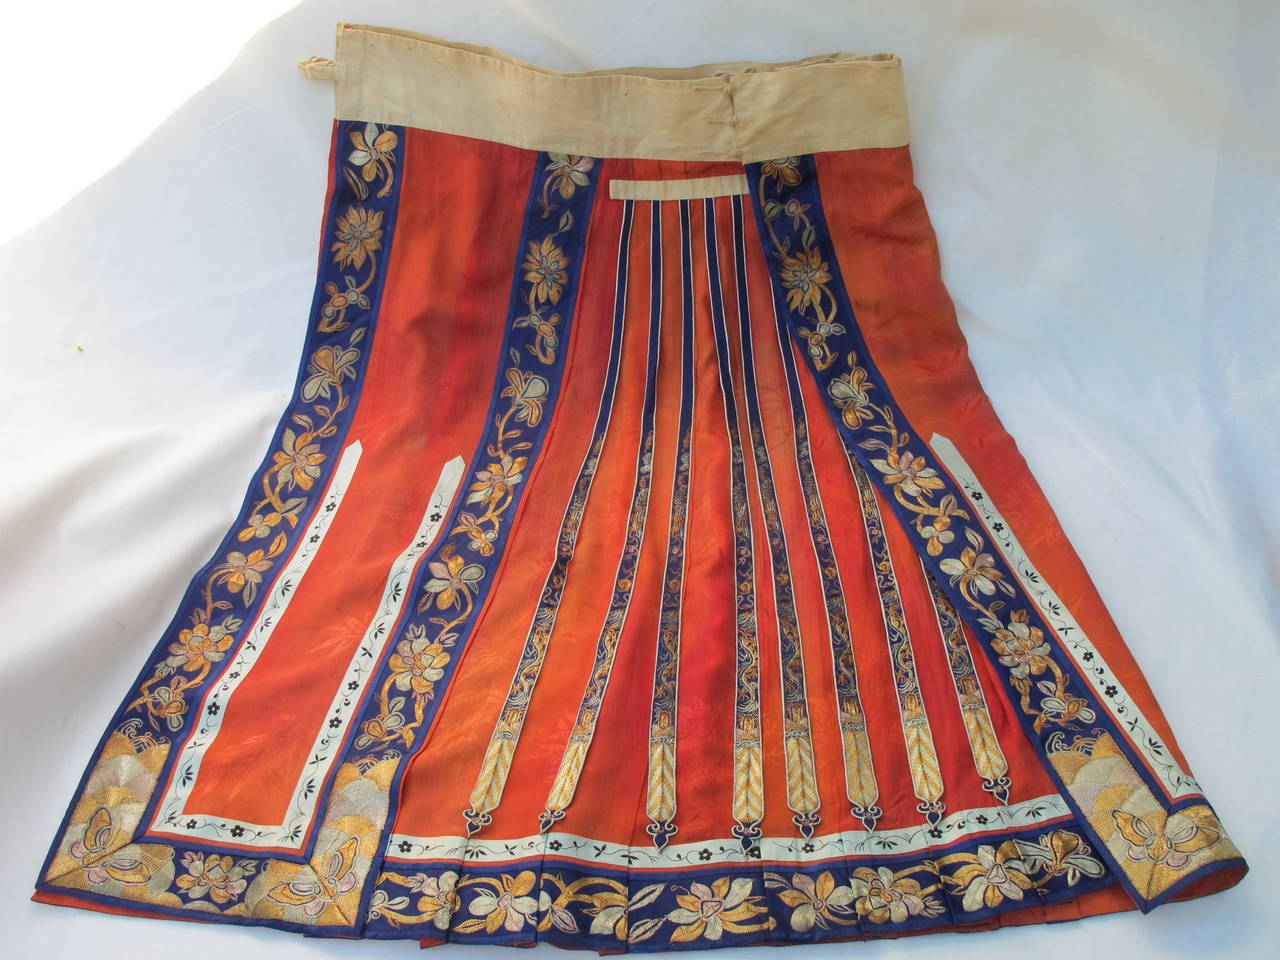 Heavily embroidered wedding skirt and over skirt, two-piece coral silk damask skirt with navy silk satin bands having couched gold and silver metallic floral embroidery. Wide linen waistband having floral embroidered silk streamers in various hues